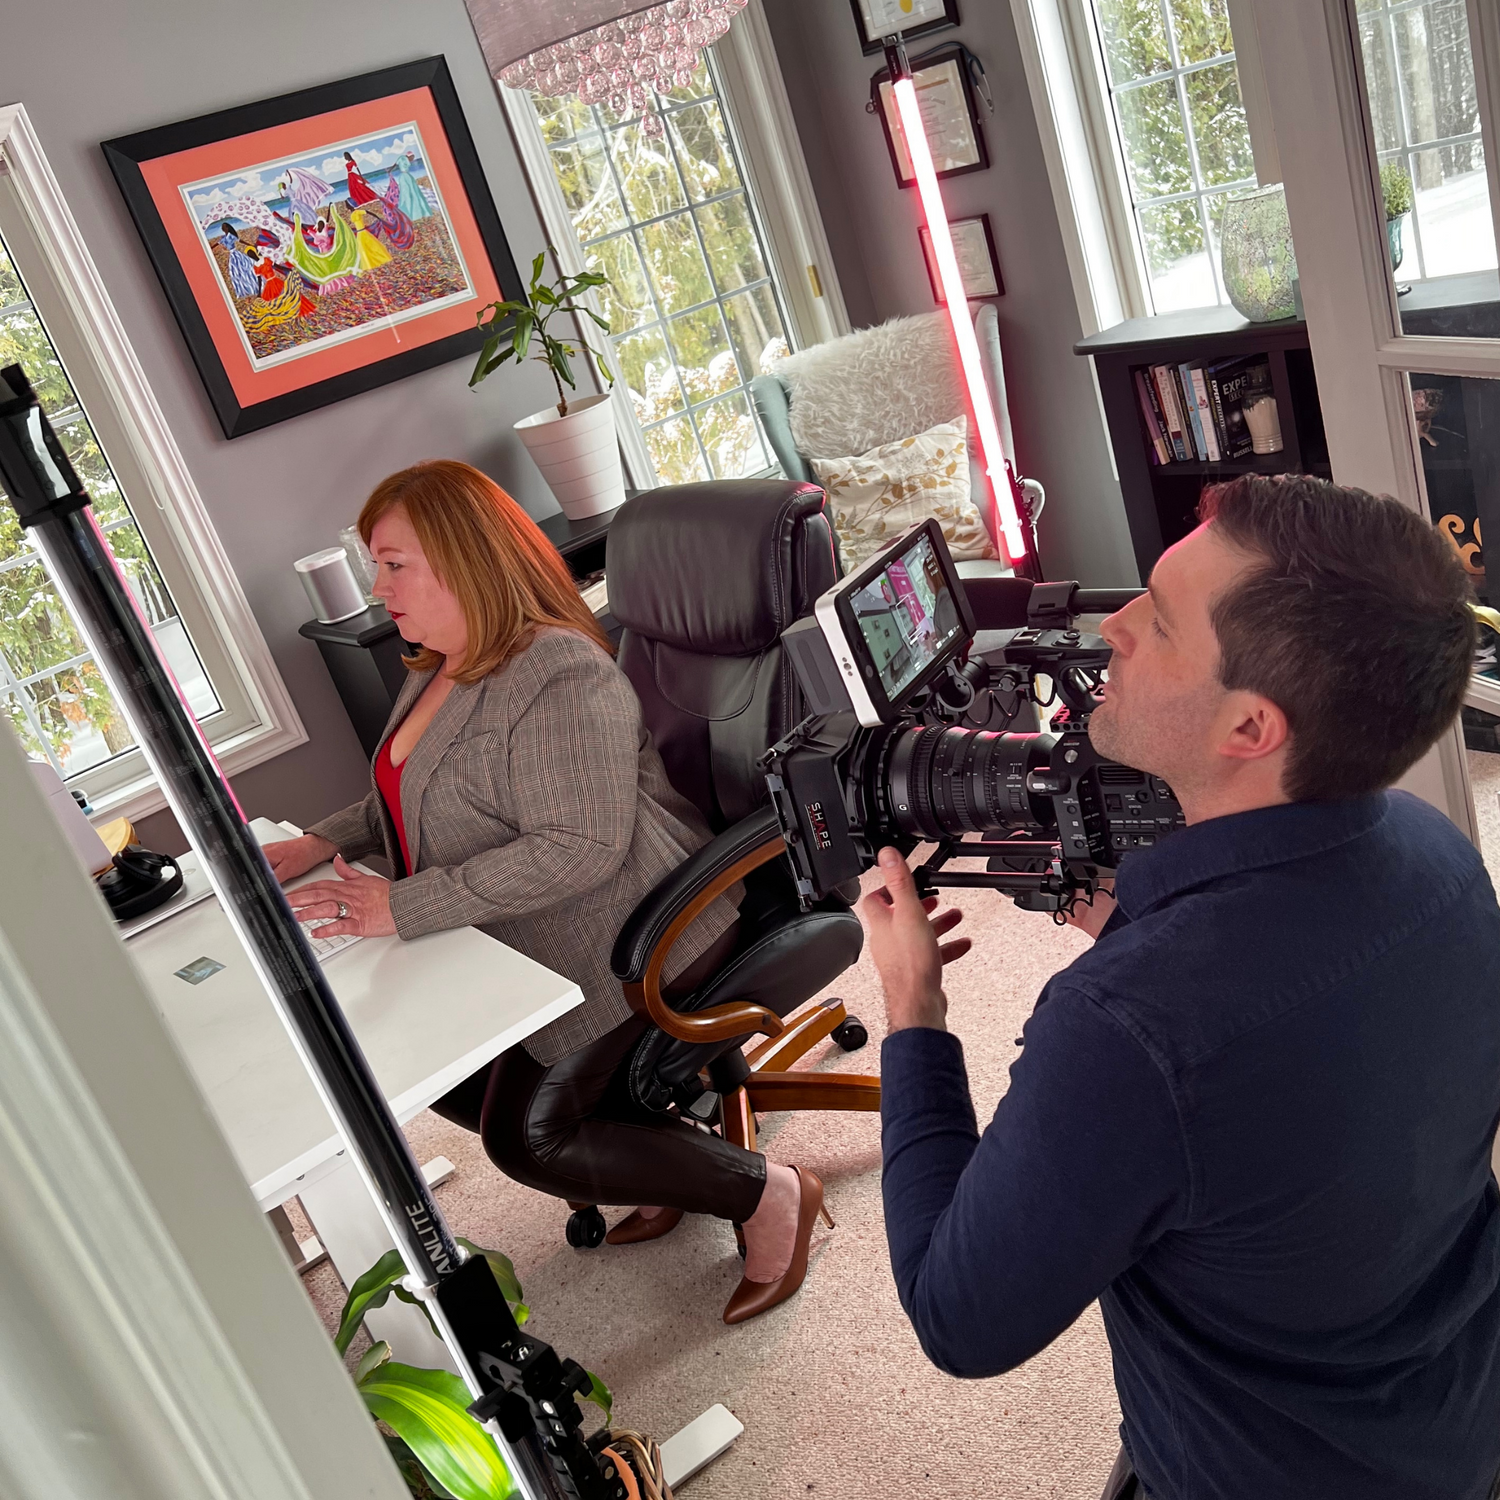 Producer shooting video footage of founder of MamaSoup at work on her social media platform for moms